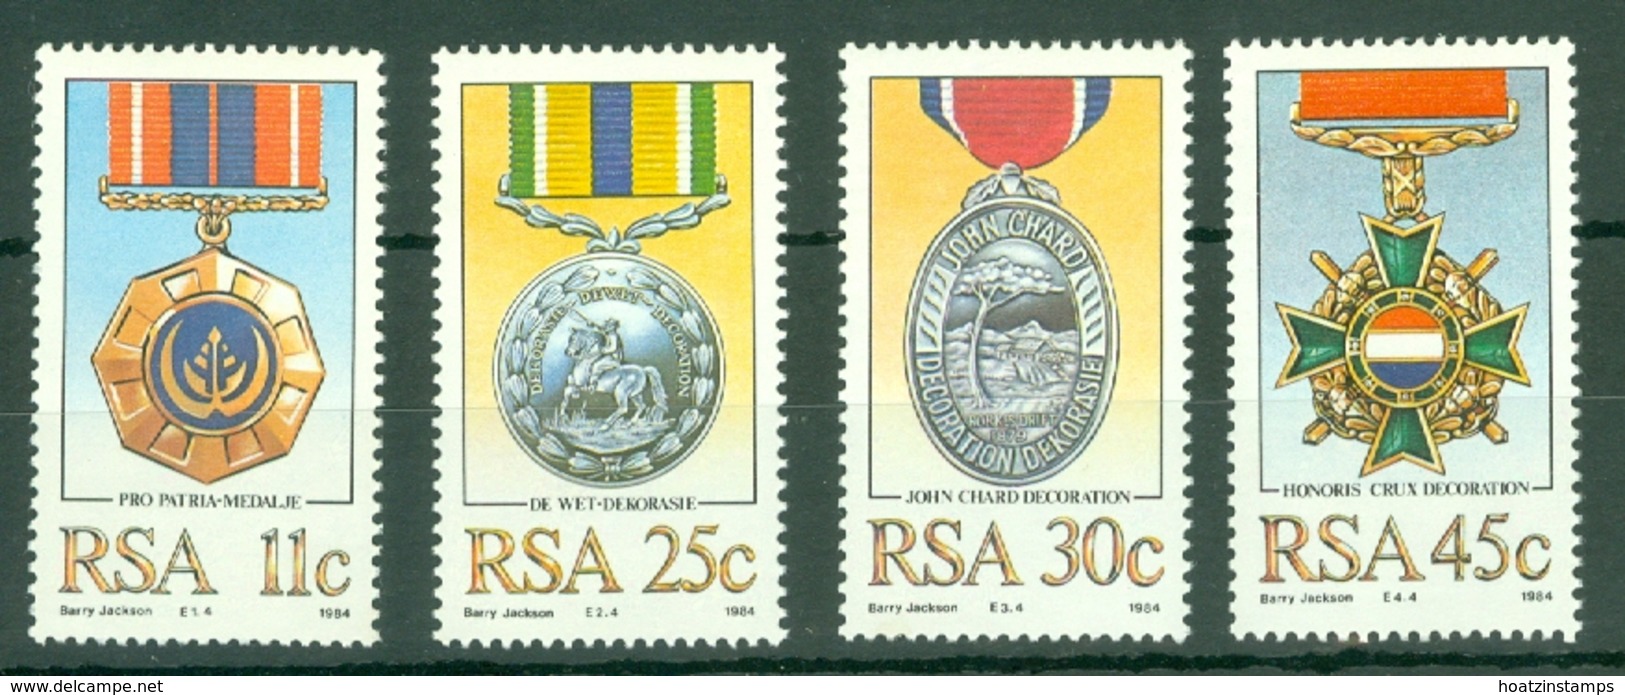 South Africa: 1984   Military Decorations   MNH - Unused Stamps